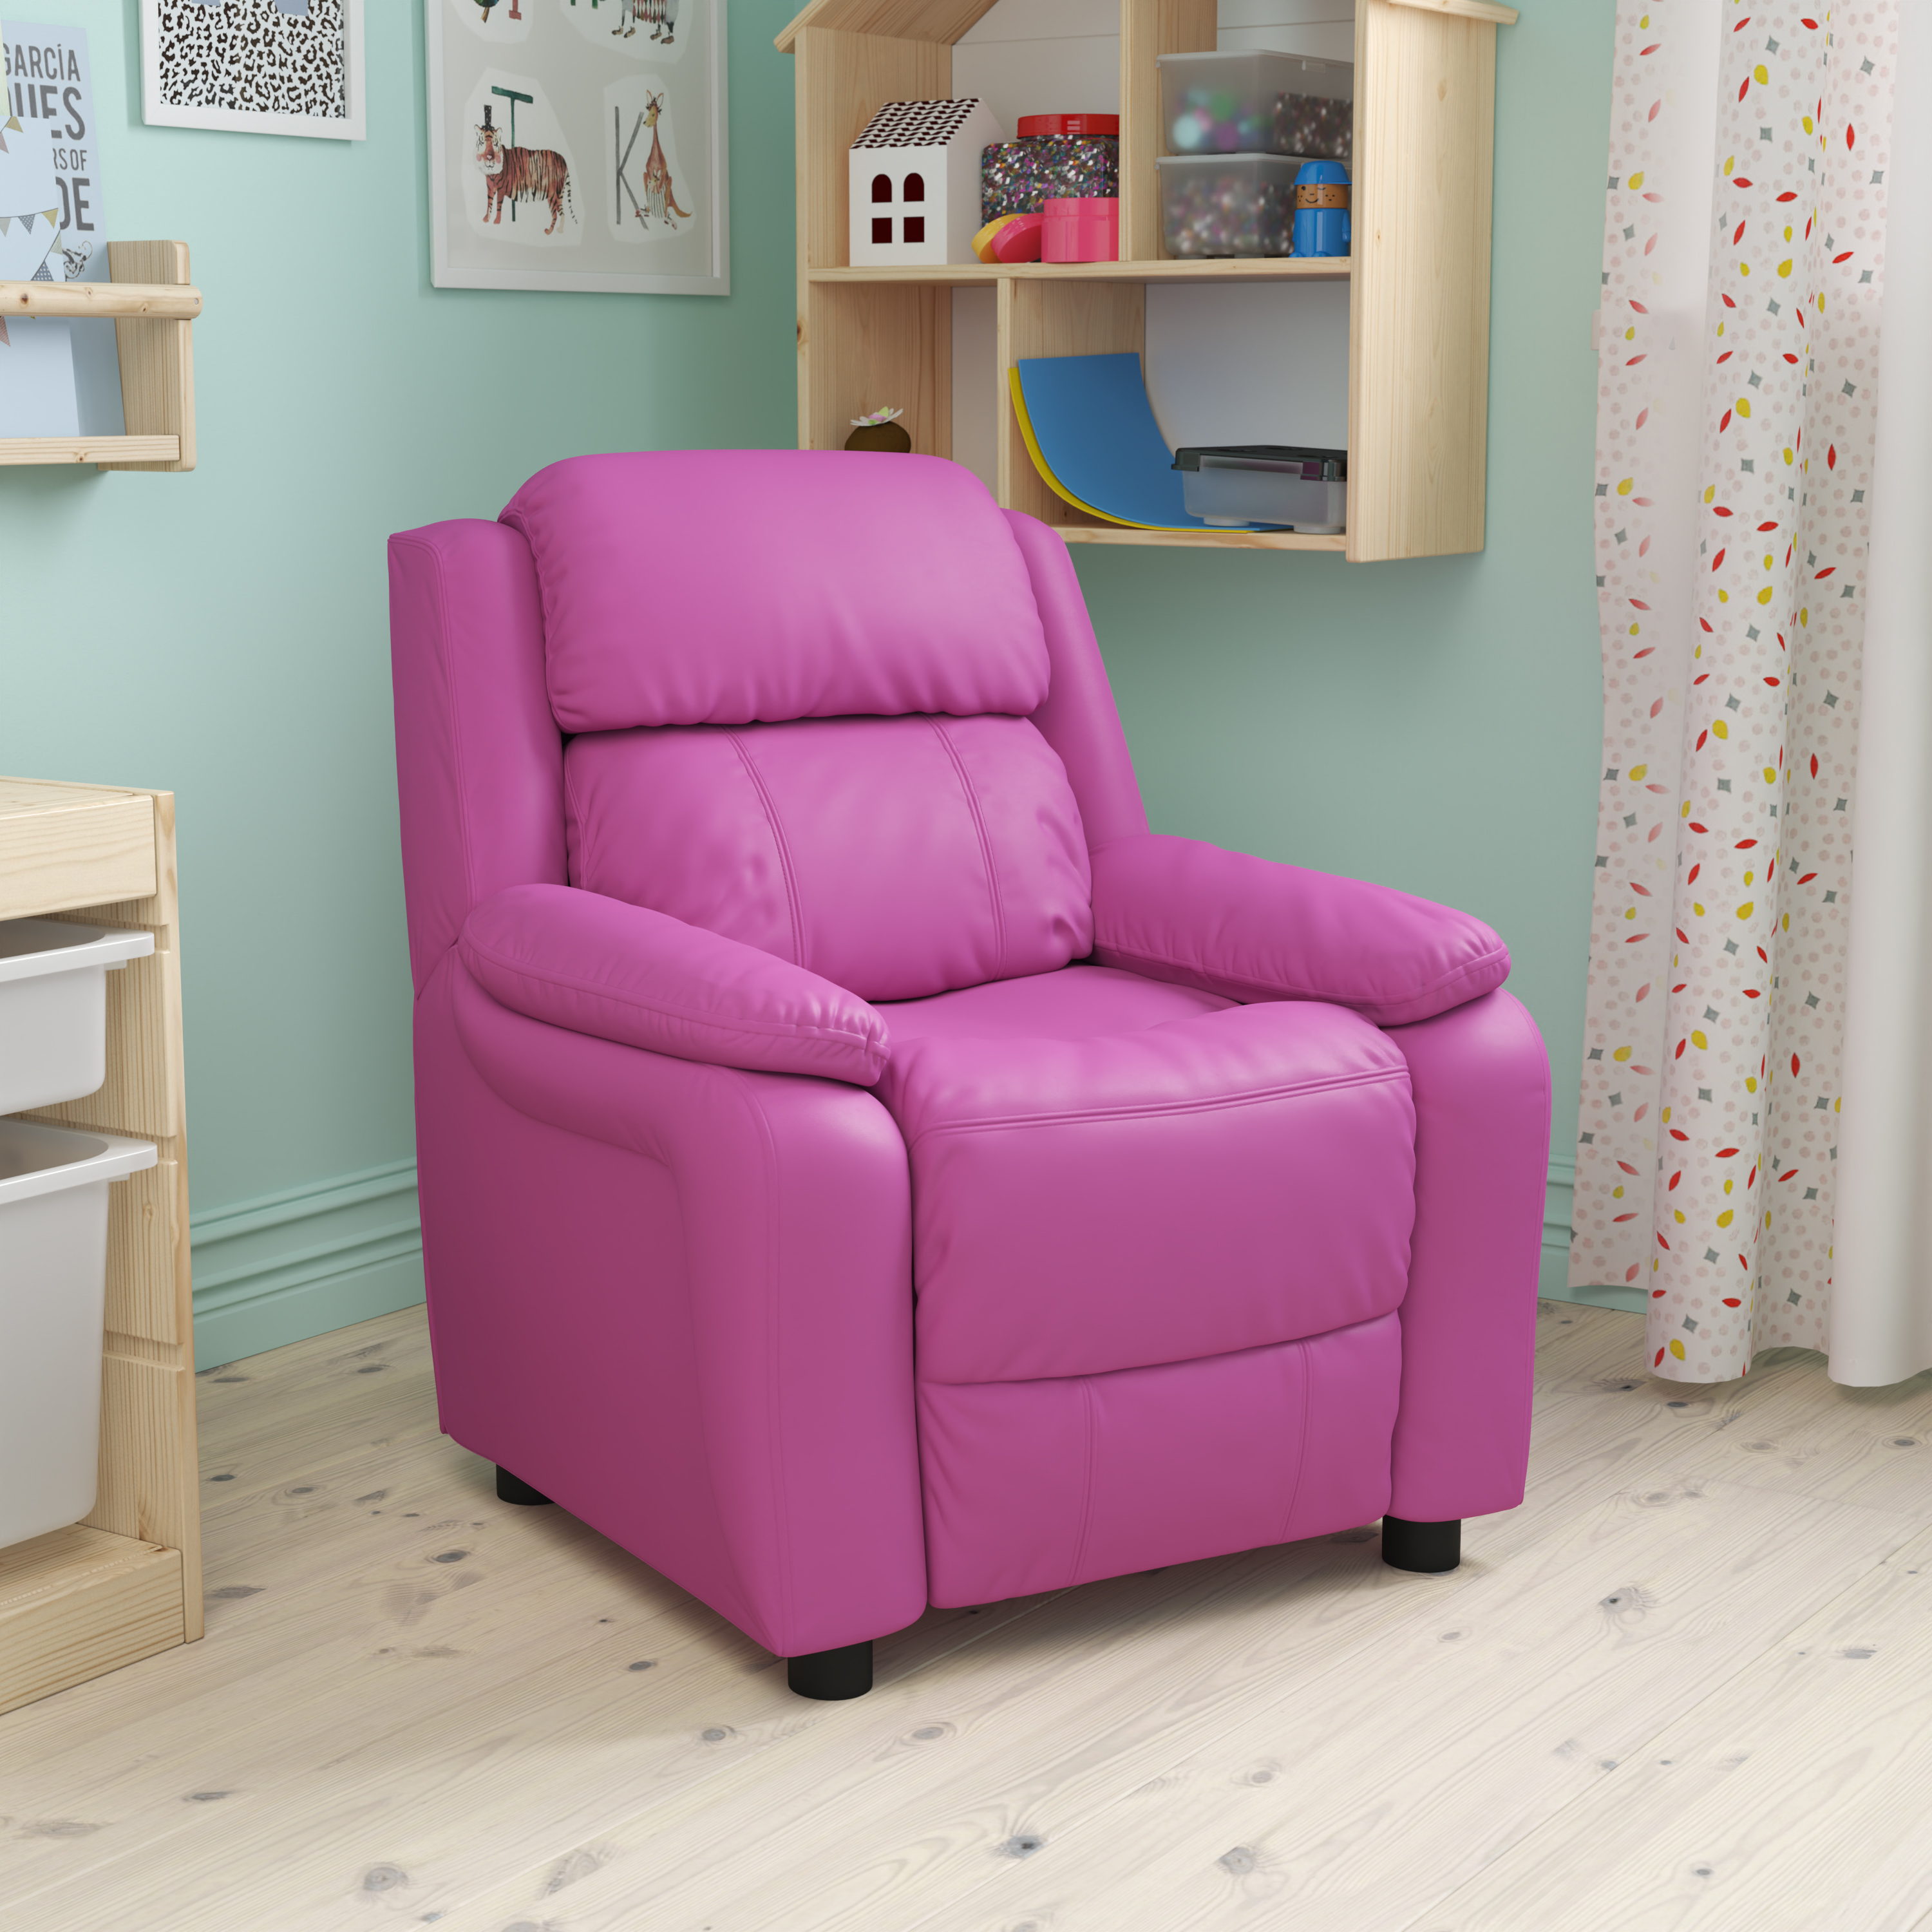 Flash Furniture Deluxe Padded Contemporary Hot Pink Vinyl Kids Recliner with Storage Arms - image 1 of 13